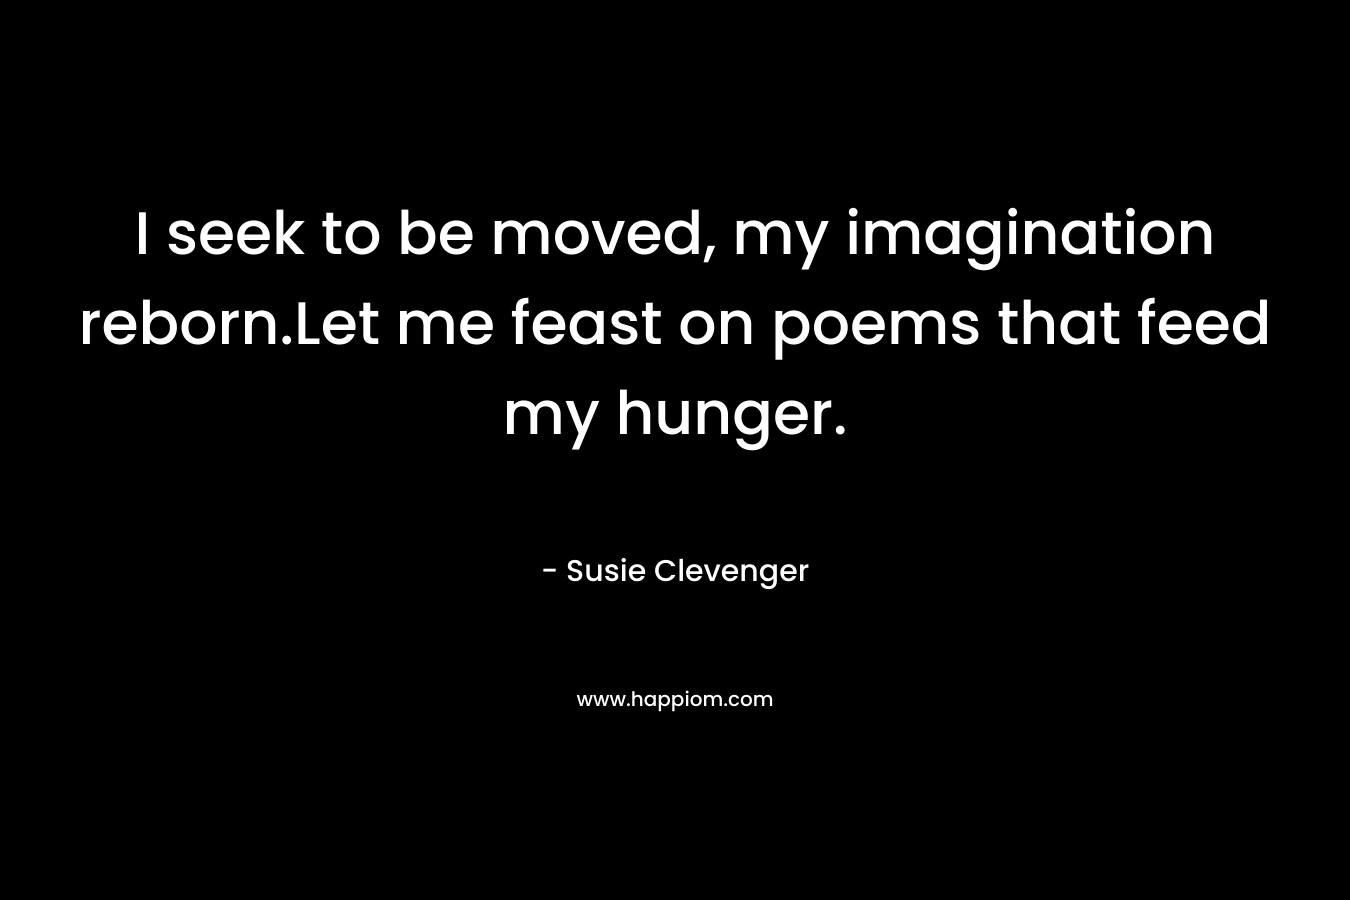 I seek to be moved, my imagination reborn.Let me feast on poems that feed my hunger. – Susie Clevenger